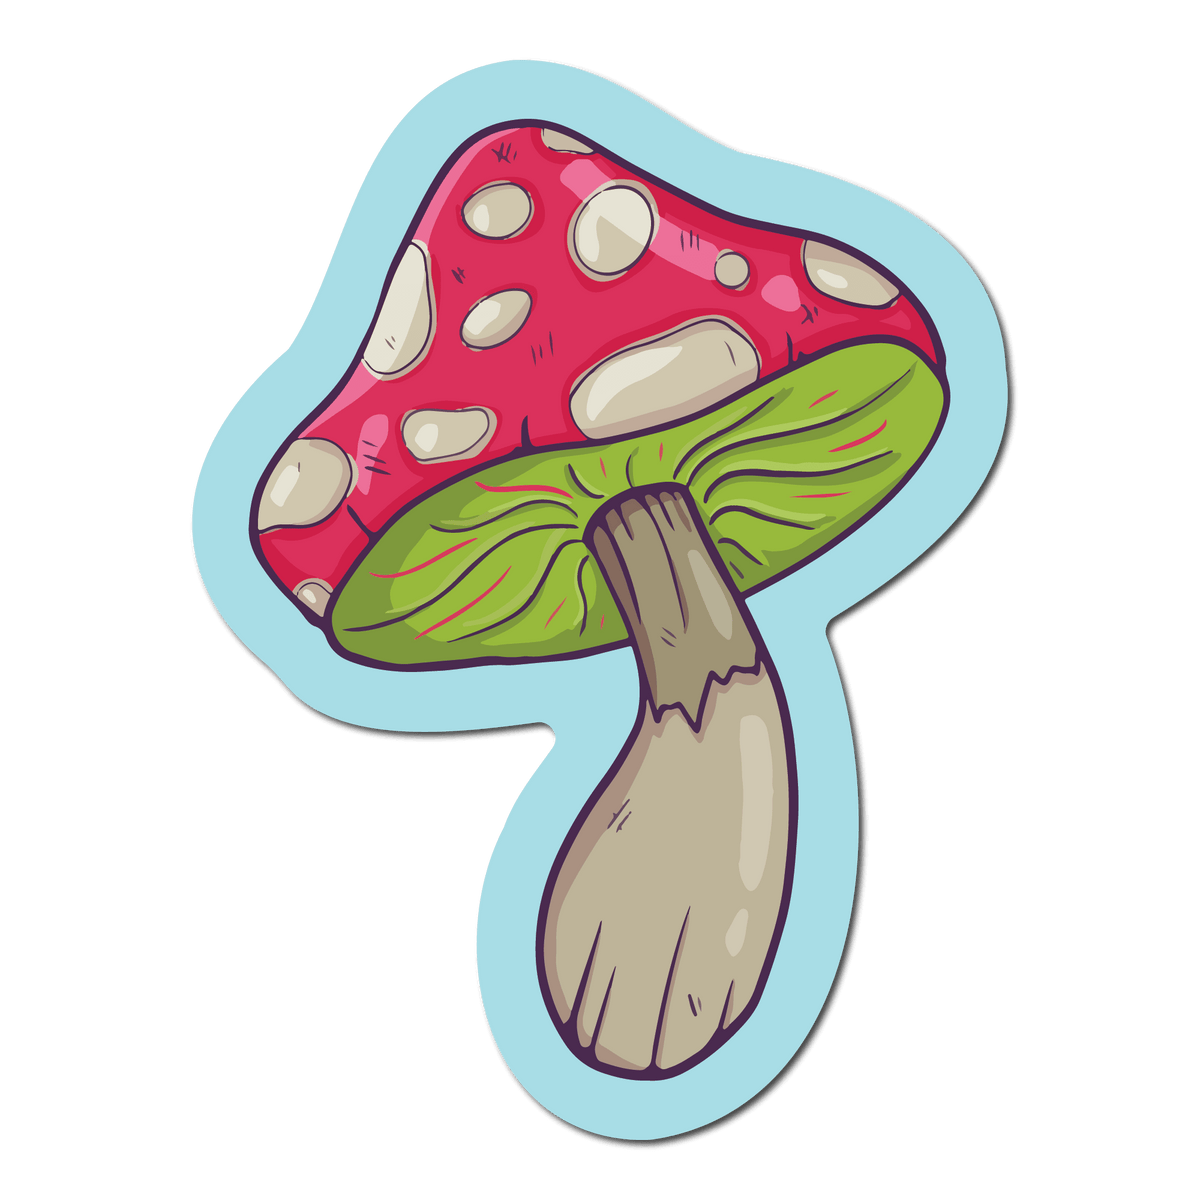 Small Sticker of a red and green mushroom